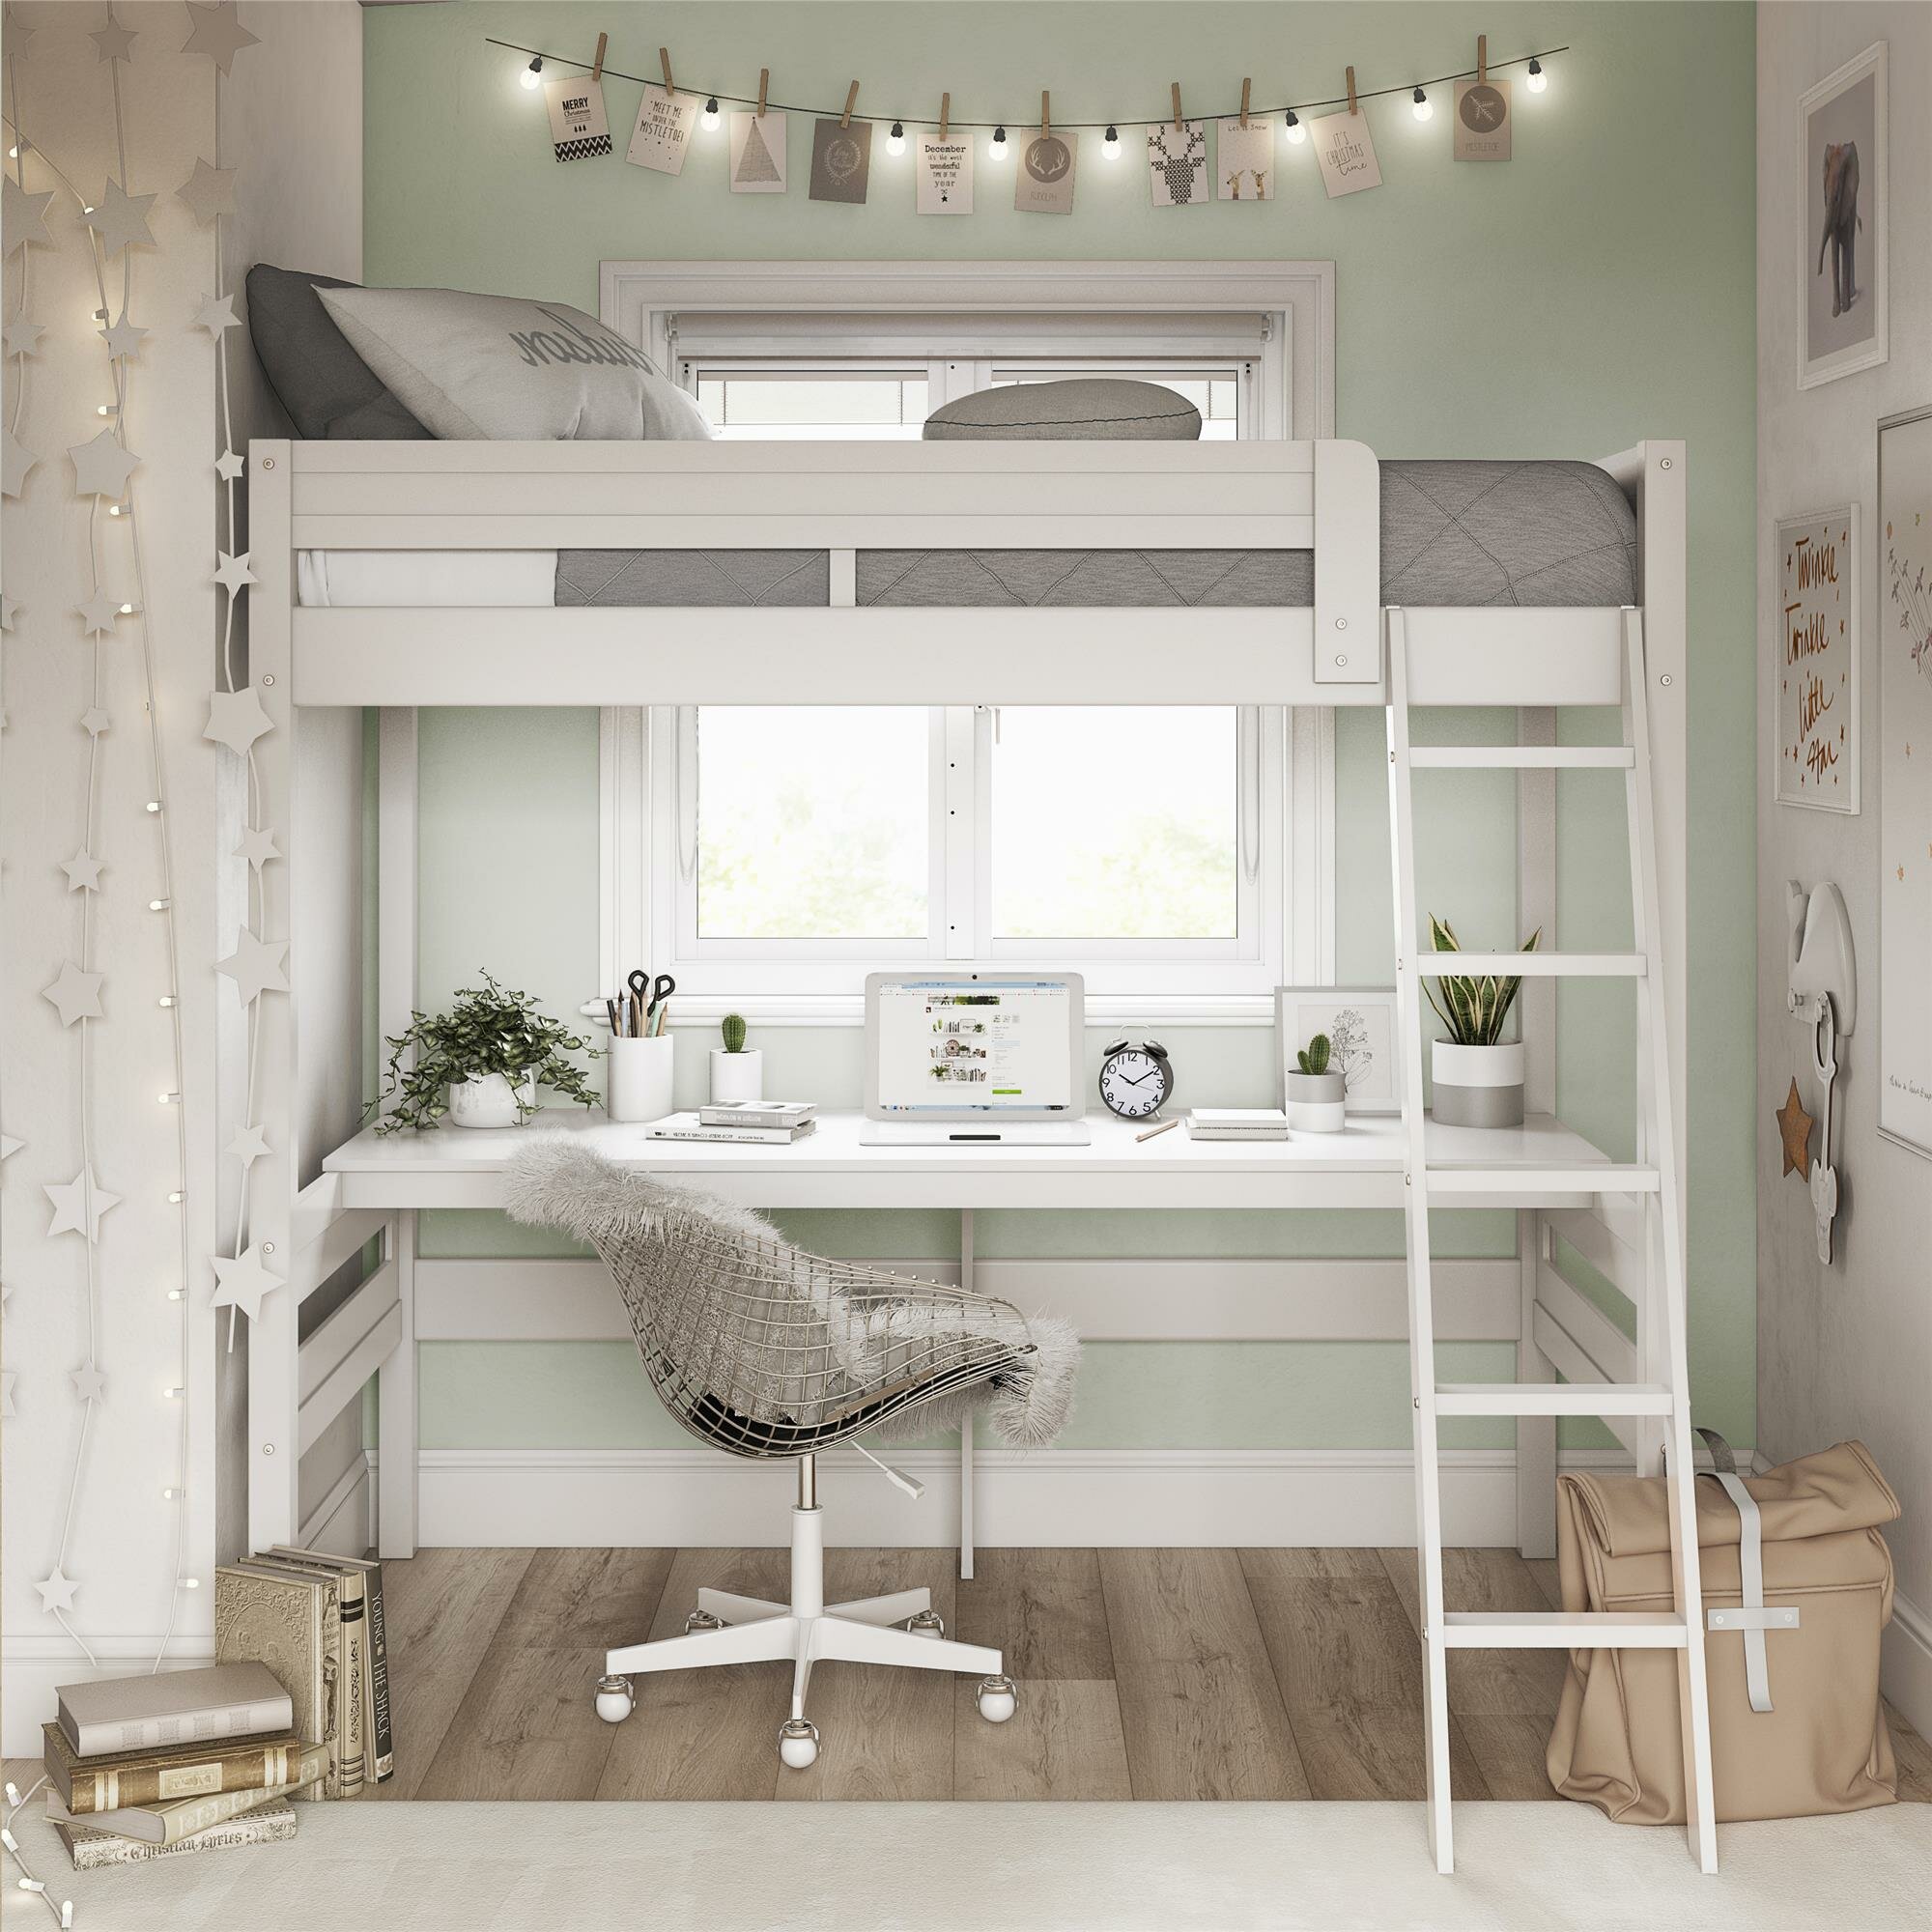 loft bed and desk